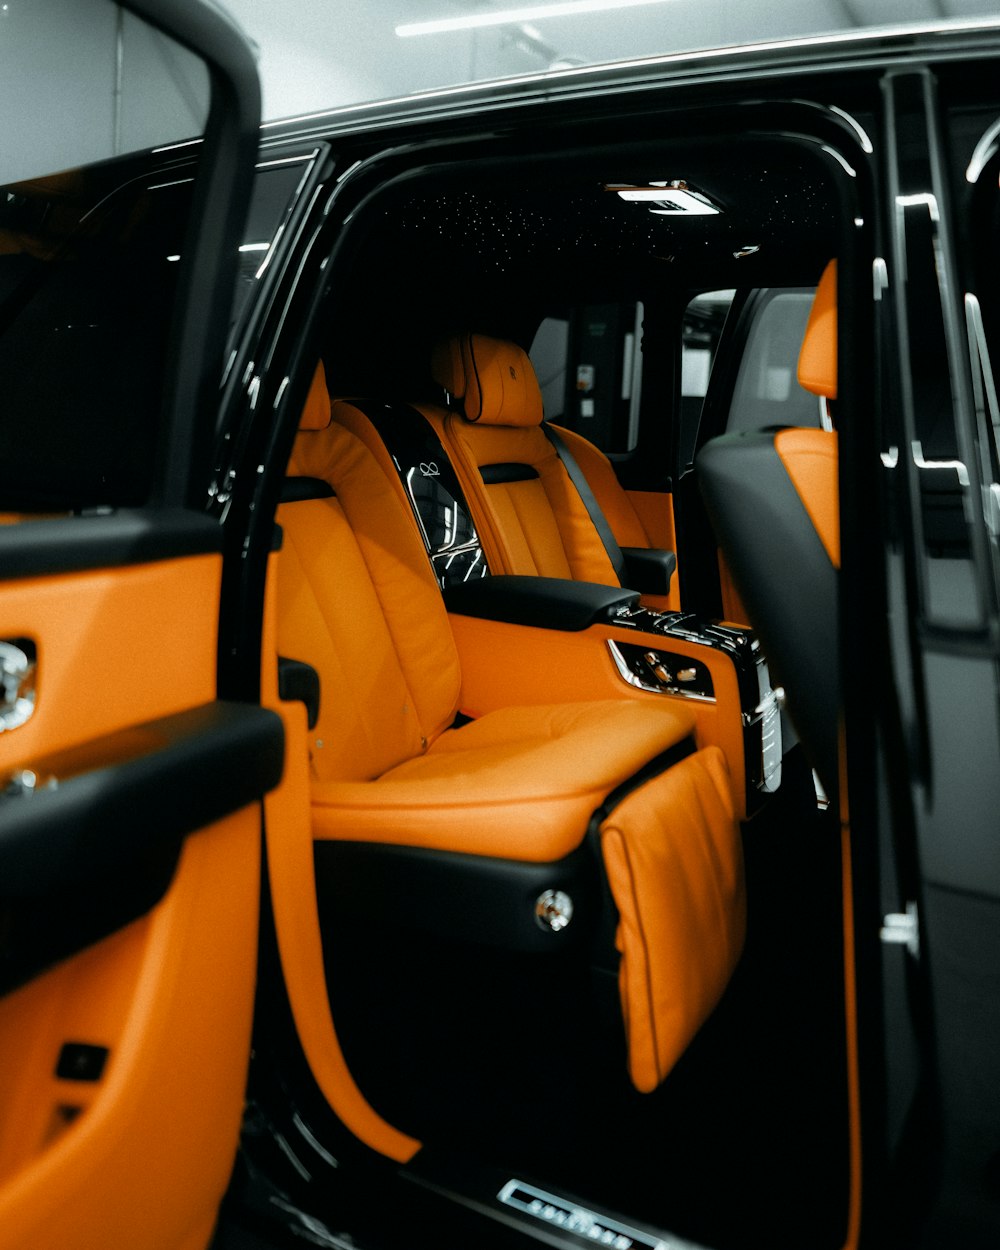 the interior of a vehicle with orange leather seats